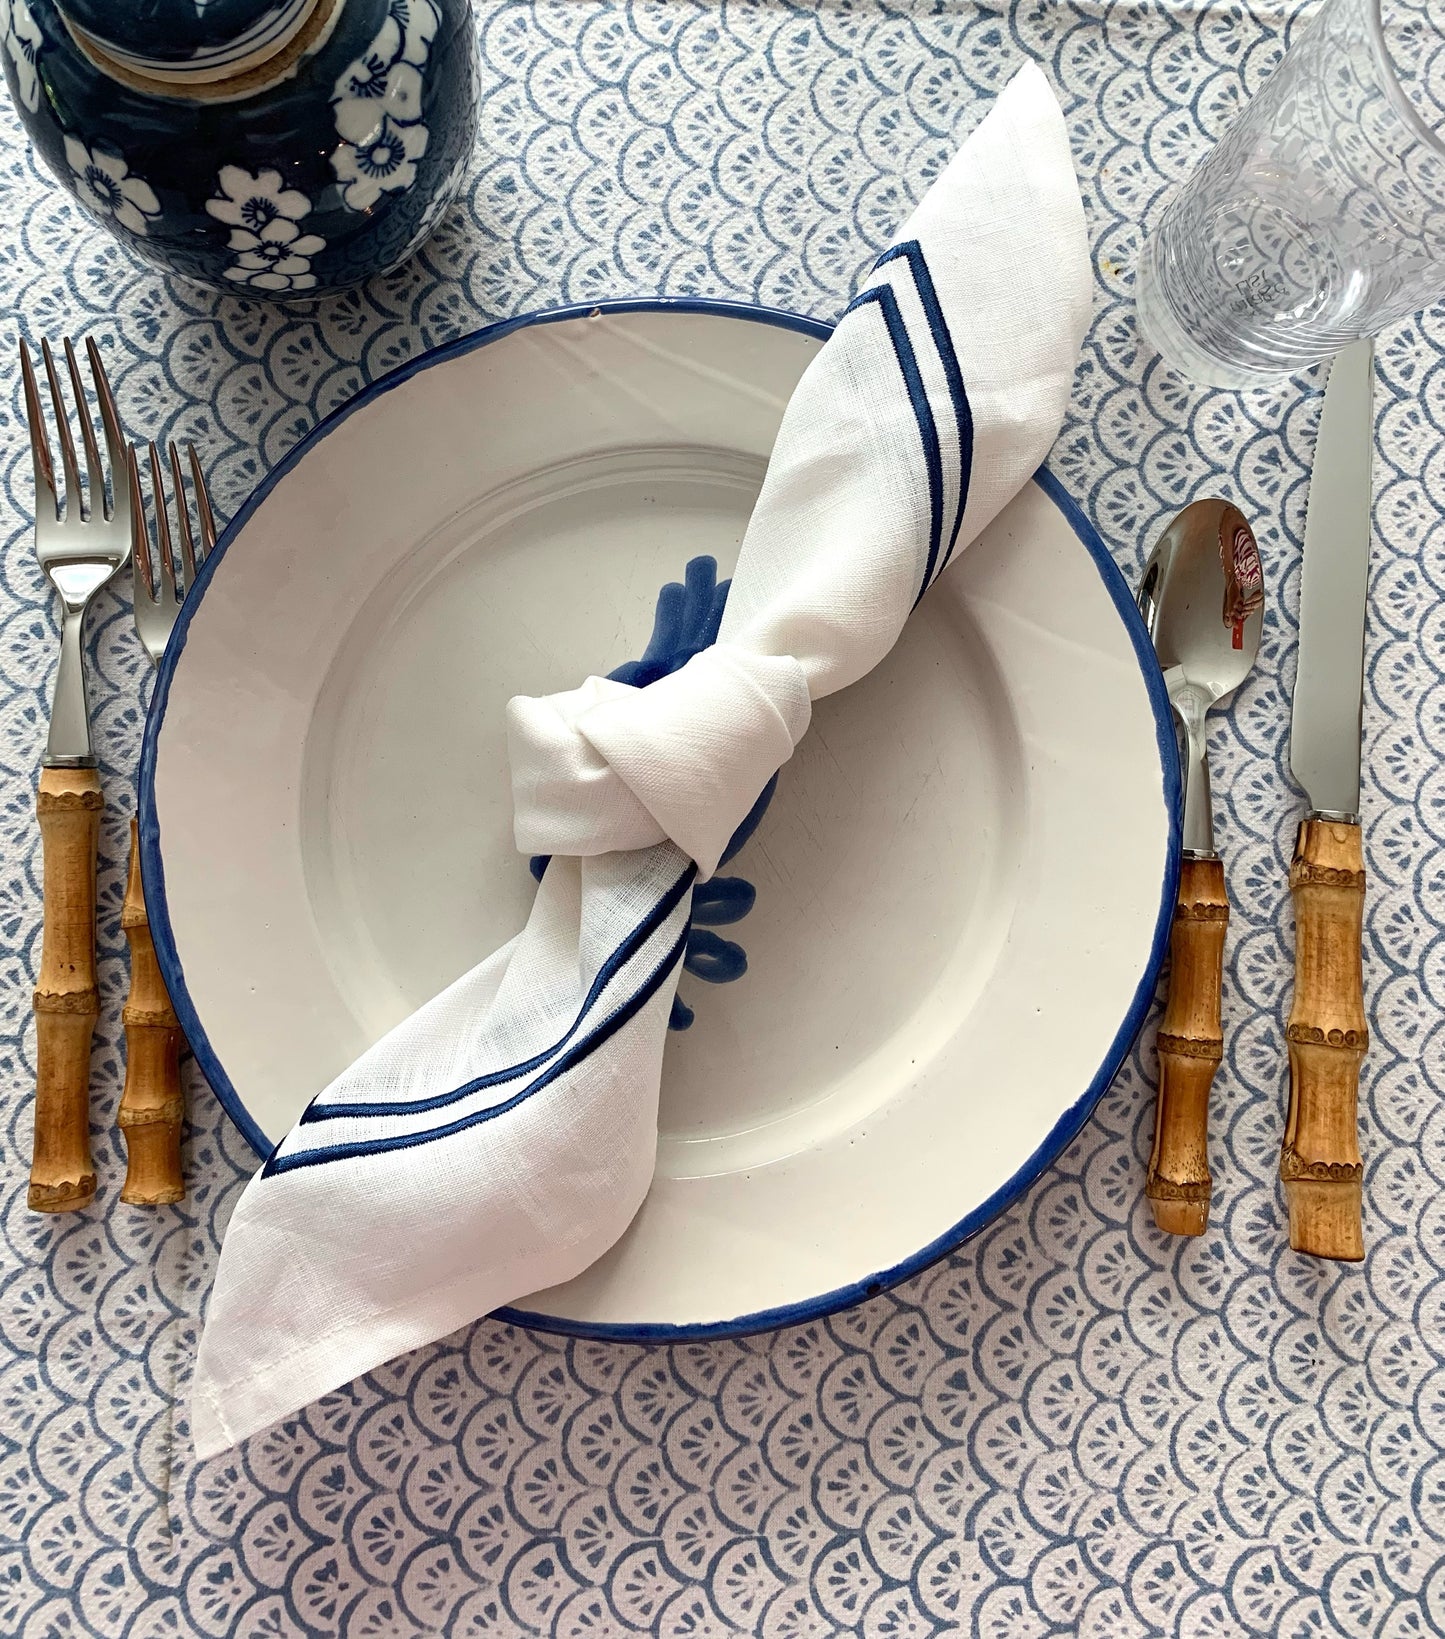 A blue and white place setting with a knotted linen napkin with dark blue piping.